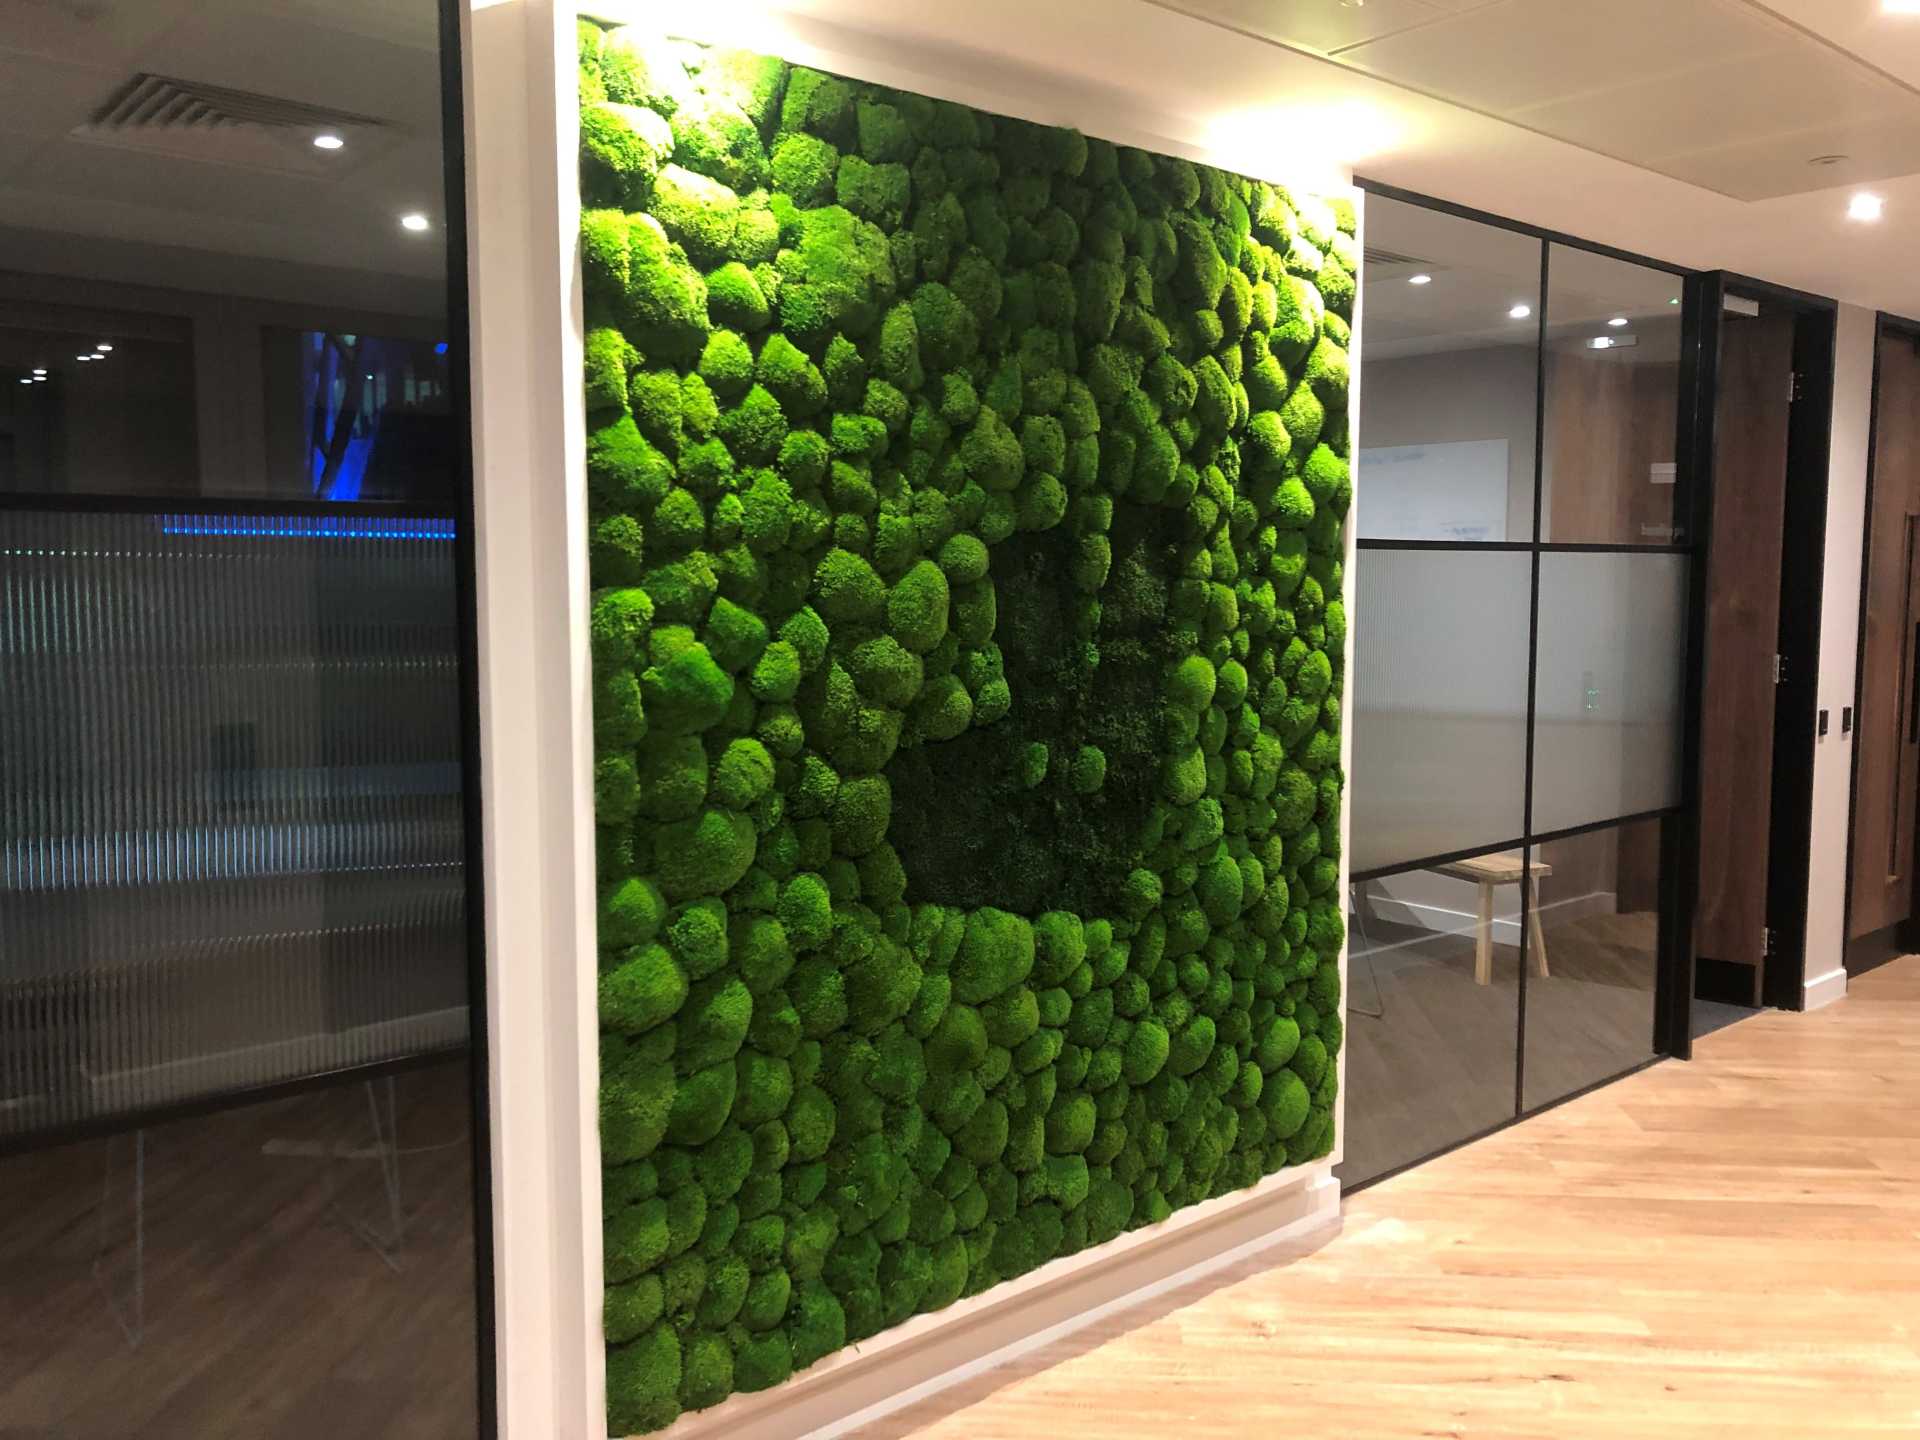 Moss Wall Installation Deliveroo 4- Sept 2019-min